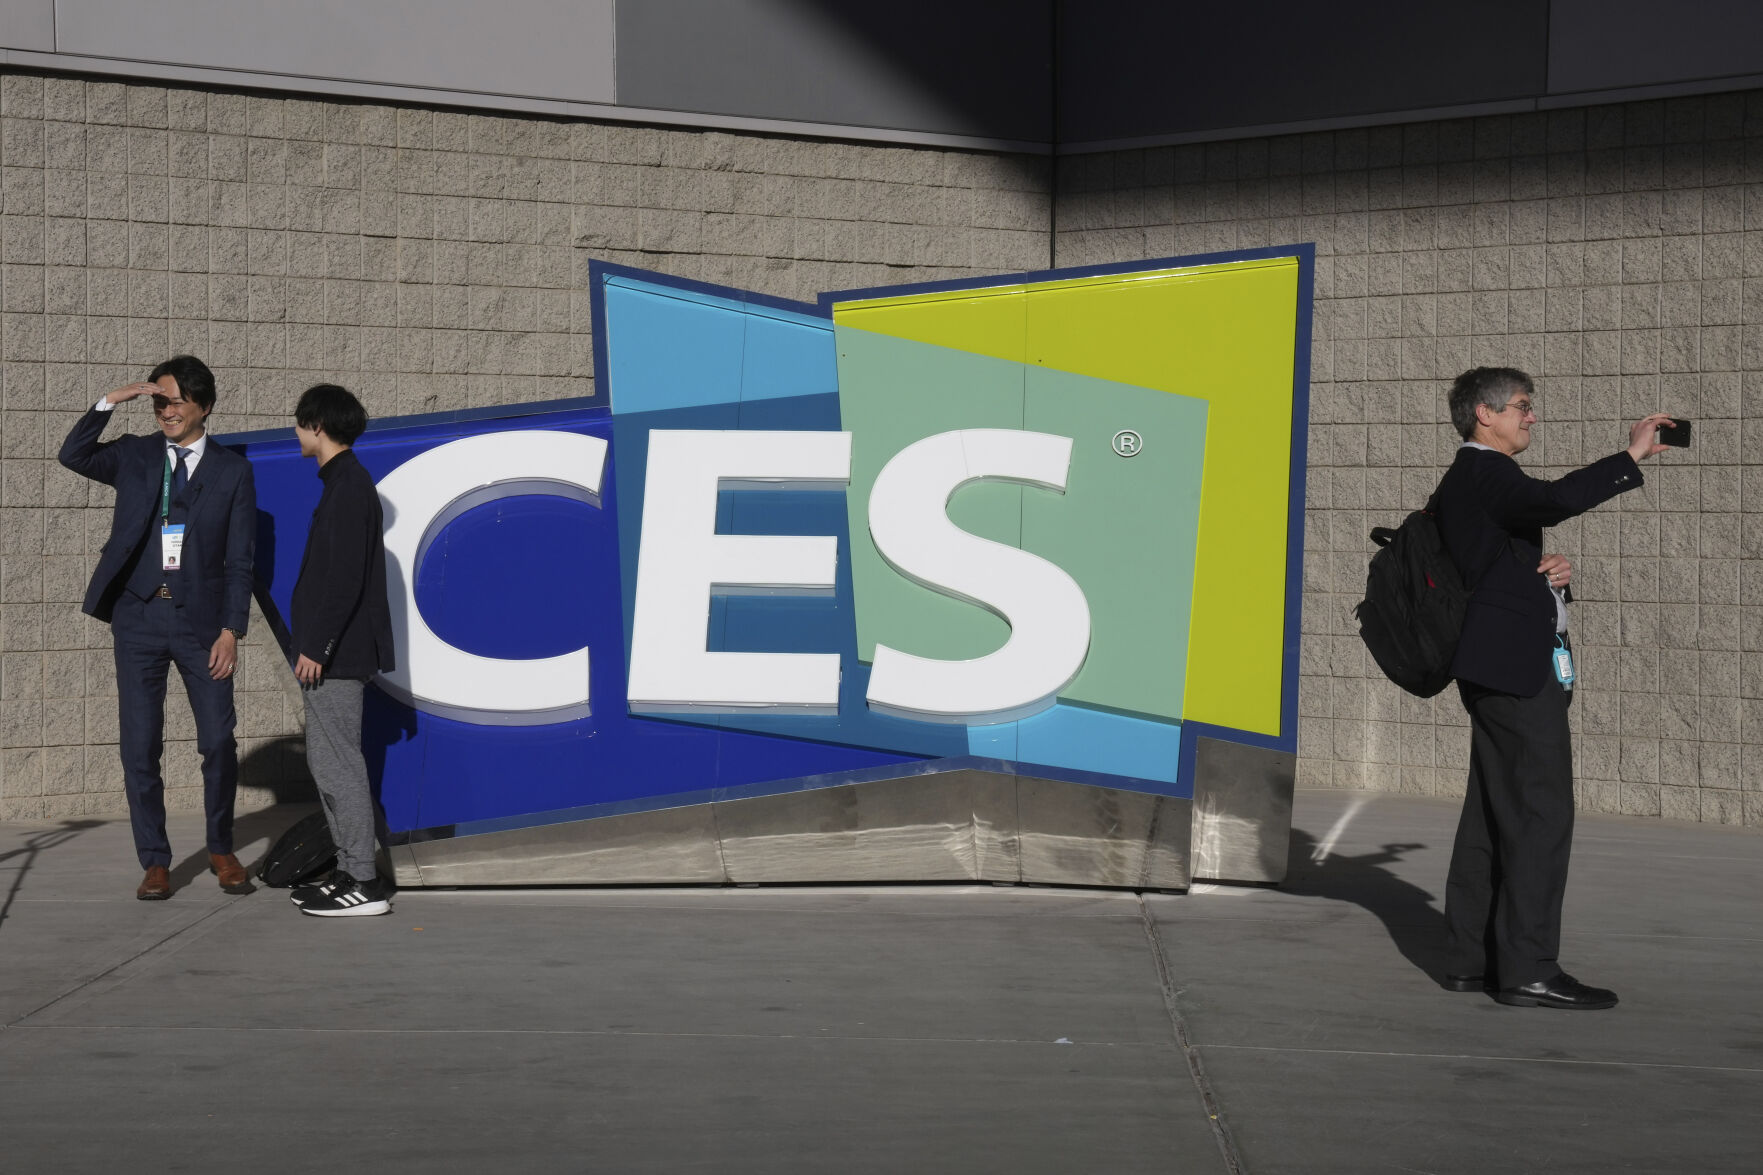 <p>FILE - People take pictures in front of a sign during the CES tech show on Jan. 6, 2022, in Las Vegas. CES is returning to Las Vegas in January 2023 with the hope that it inches closer to how it looked before the pandemic. (AP Photo/Joe Buglewicz, File)</p>   PHOTO CREDIT: Joe Buglewicz 